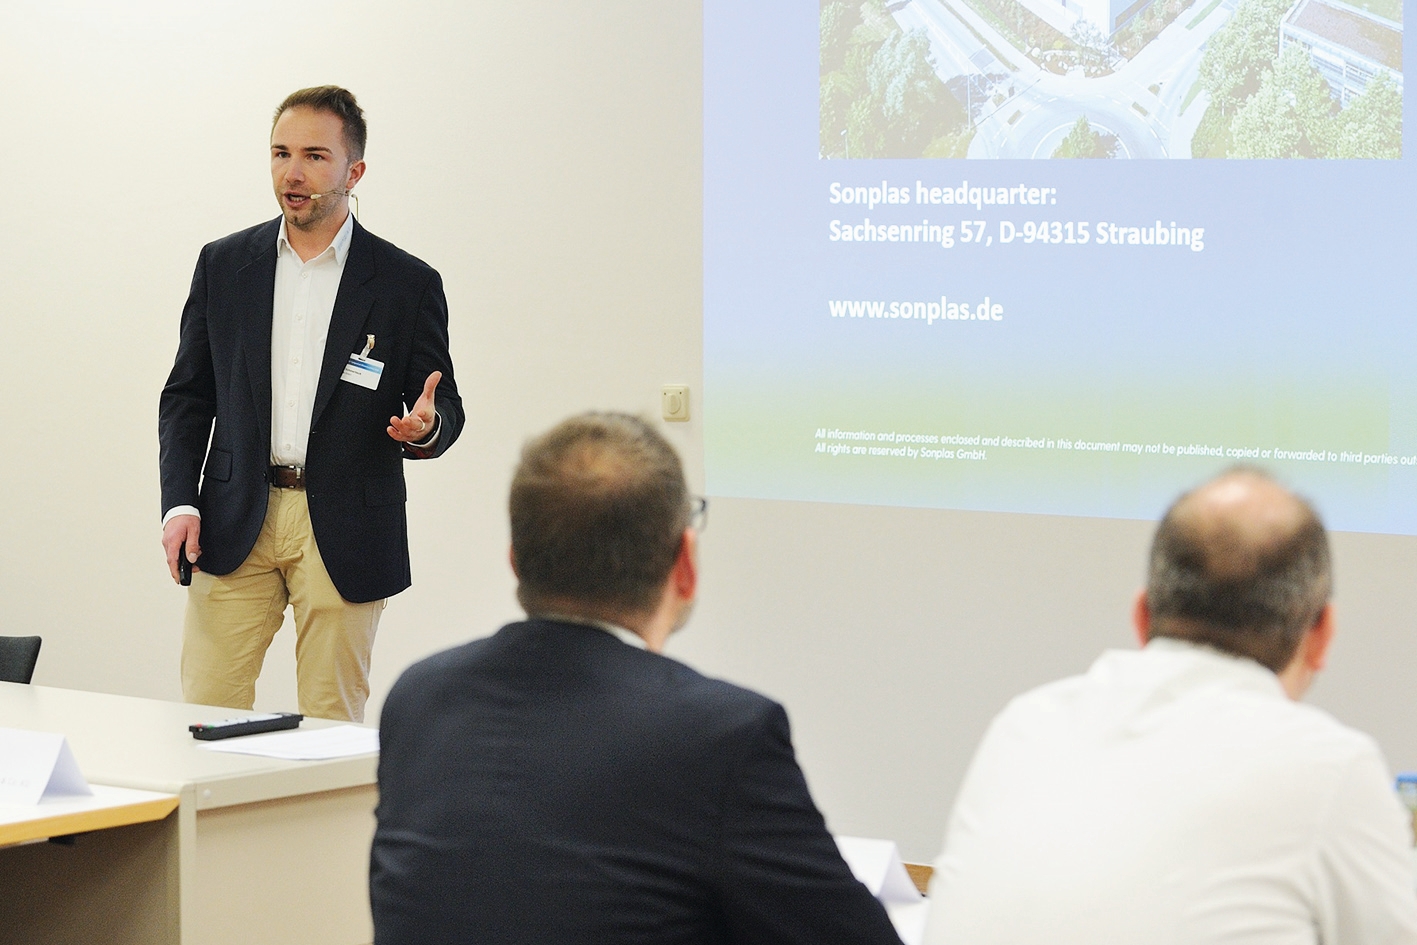 Luca Schmerbeck, Sonplas: "The use of laser technology in battery cell production reduces tool downtime and costs, and improves battery performance."